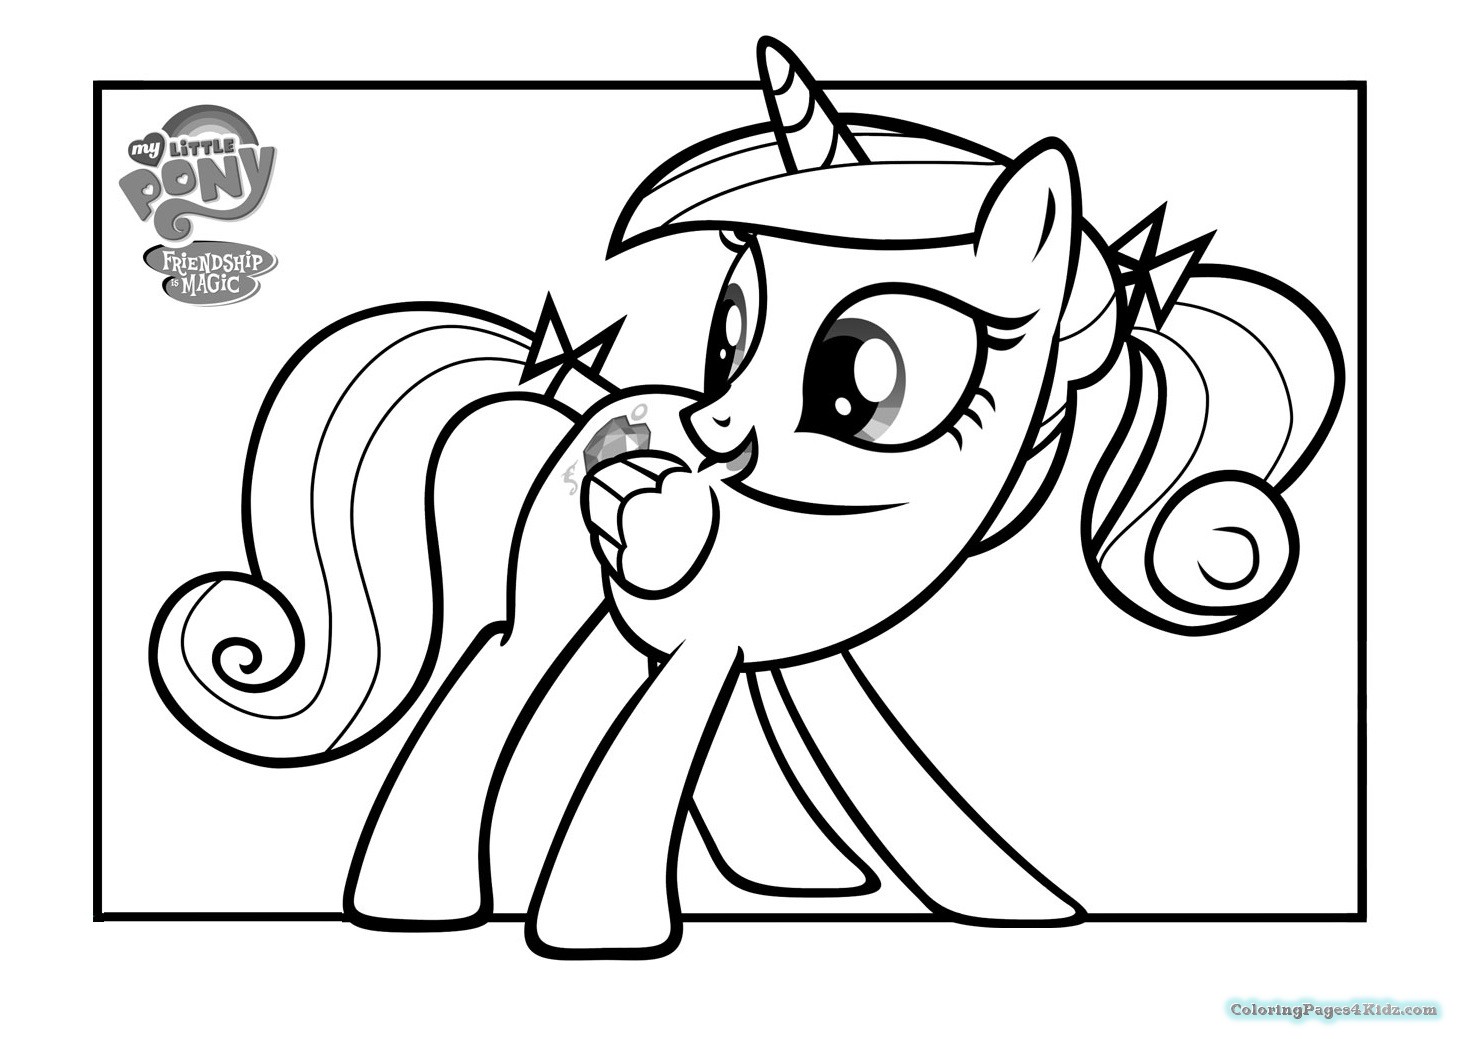 coloring book ~ My Little Pony Princessring Sheets Free Pictures Games  Dress Up 67 My Little Pony Princess Coloring Picture Inspirations. My  Little Pony Princess Coloring Sheets Free. My Little Pony Princess